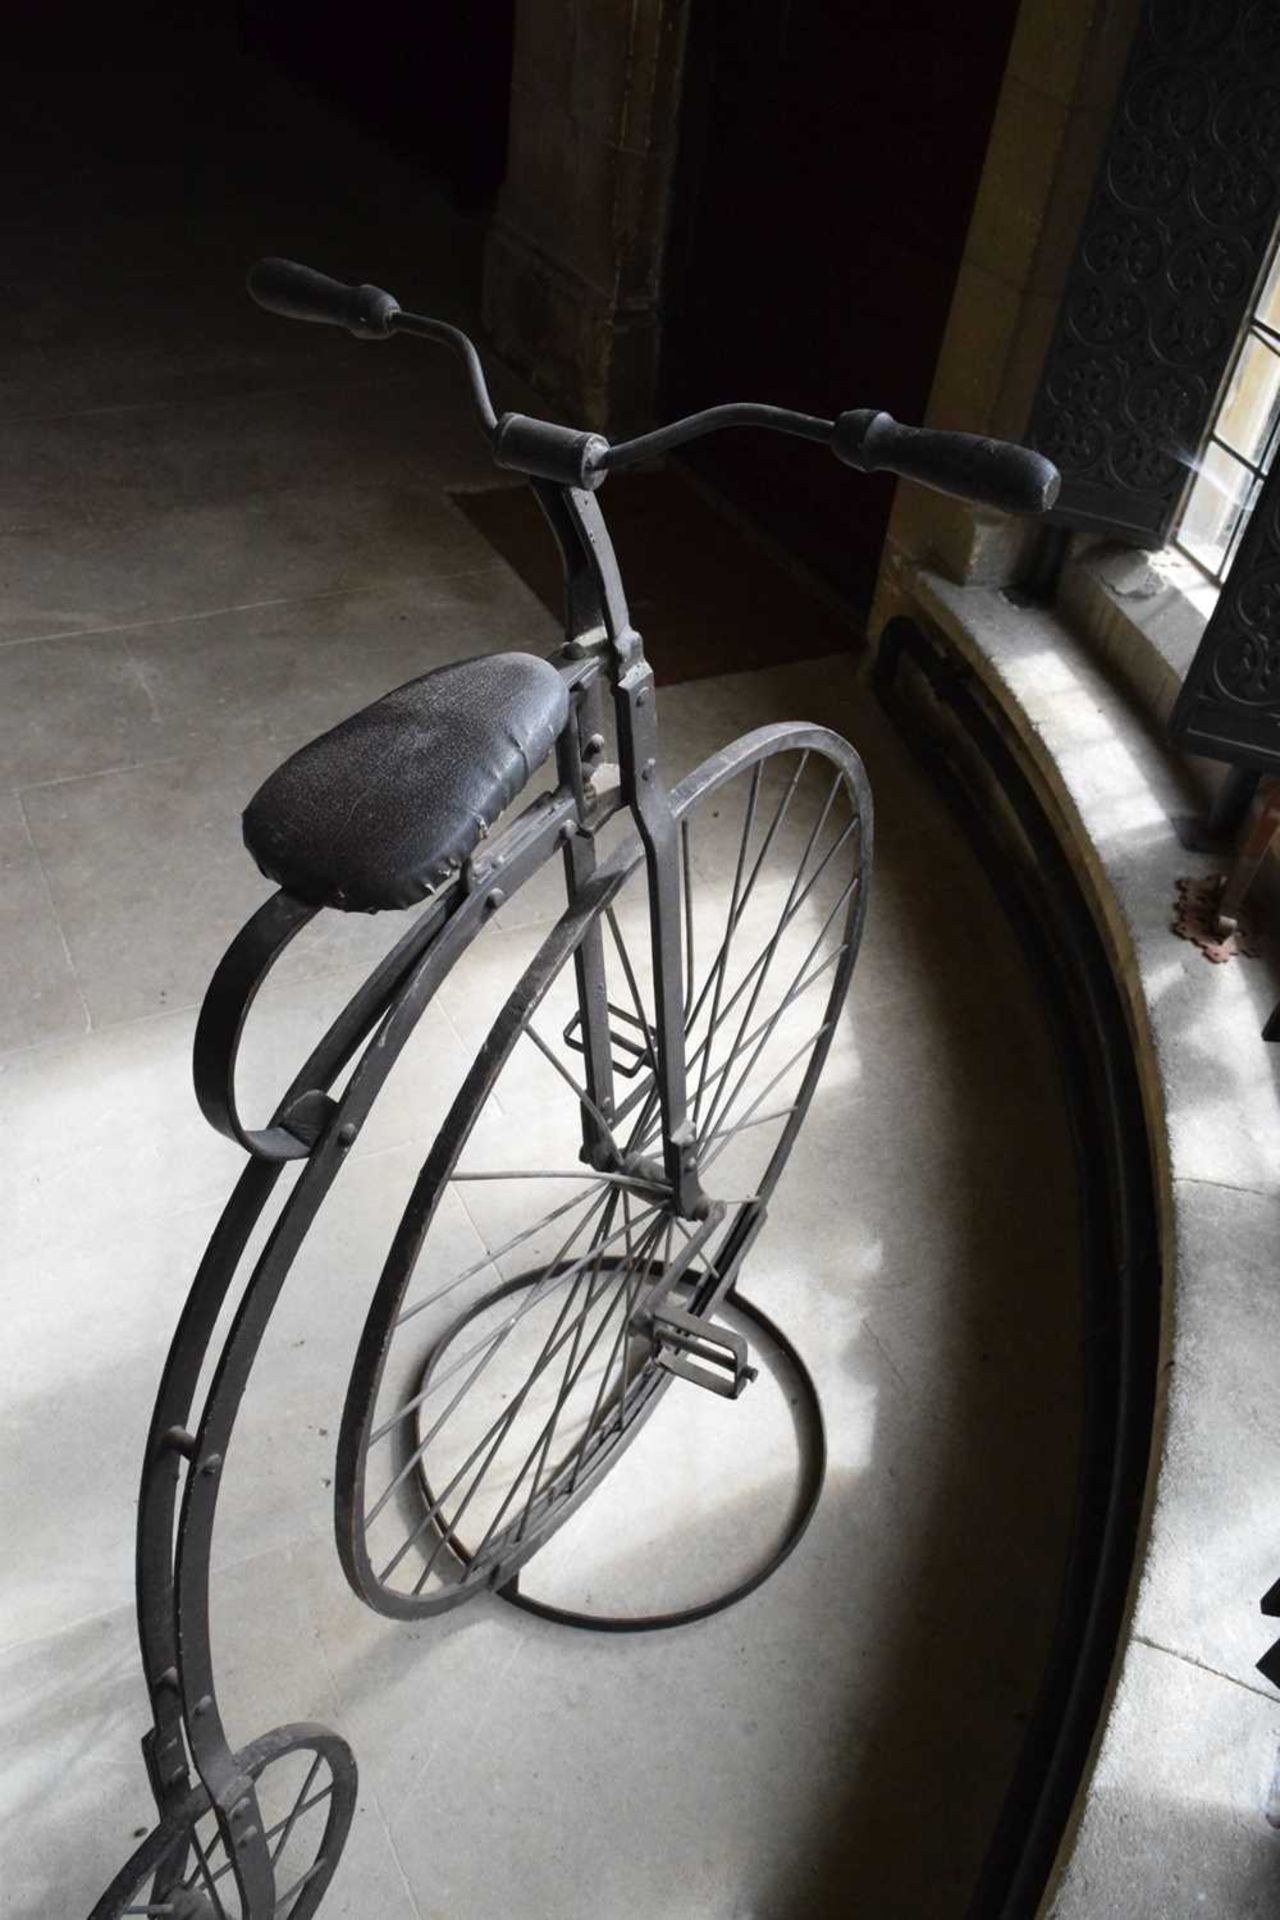 Replica penny farthing - Image 9 of 13